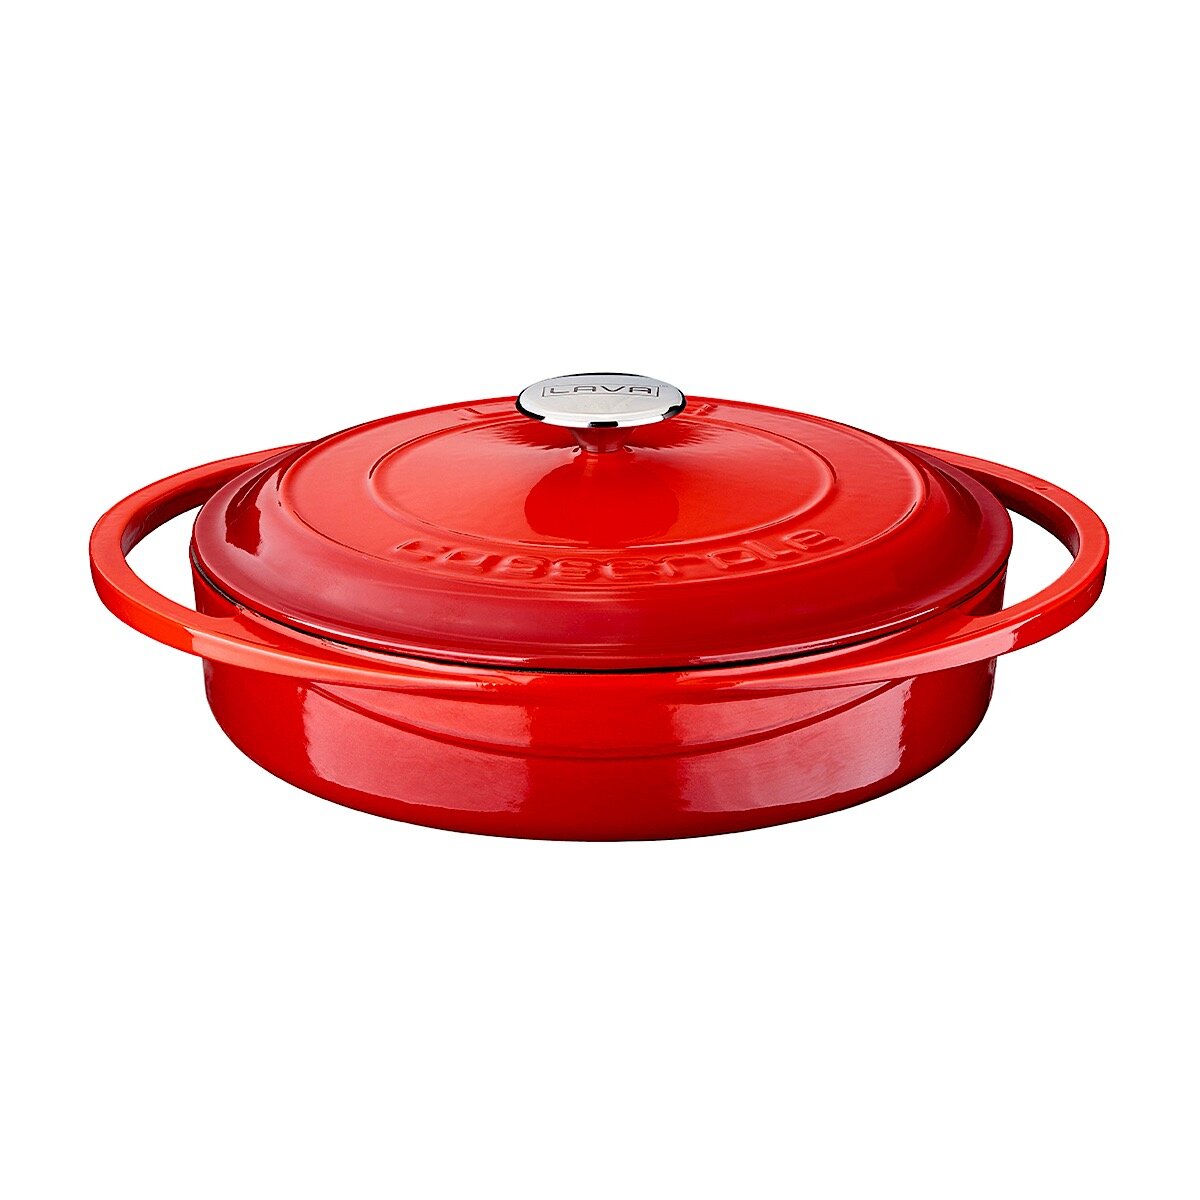 Lava Cast Iron 4 Qt. / 11 Enameled Multi Purpose Dutch Oven with Lid -  Round